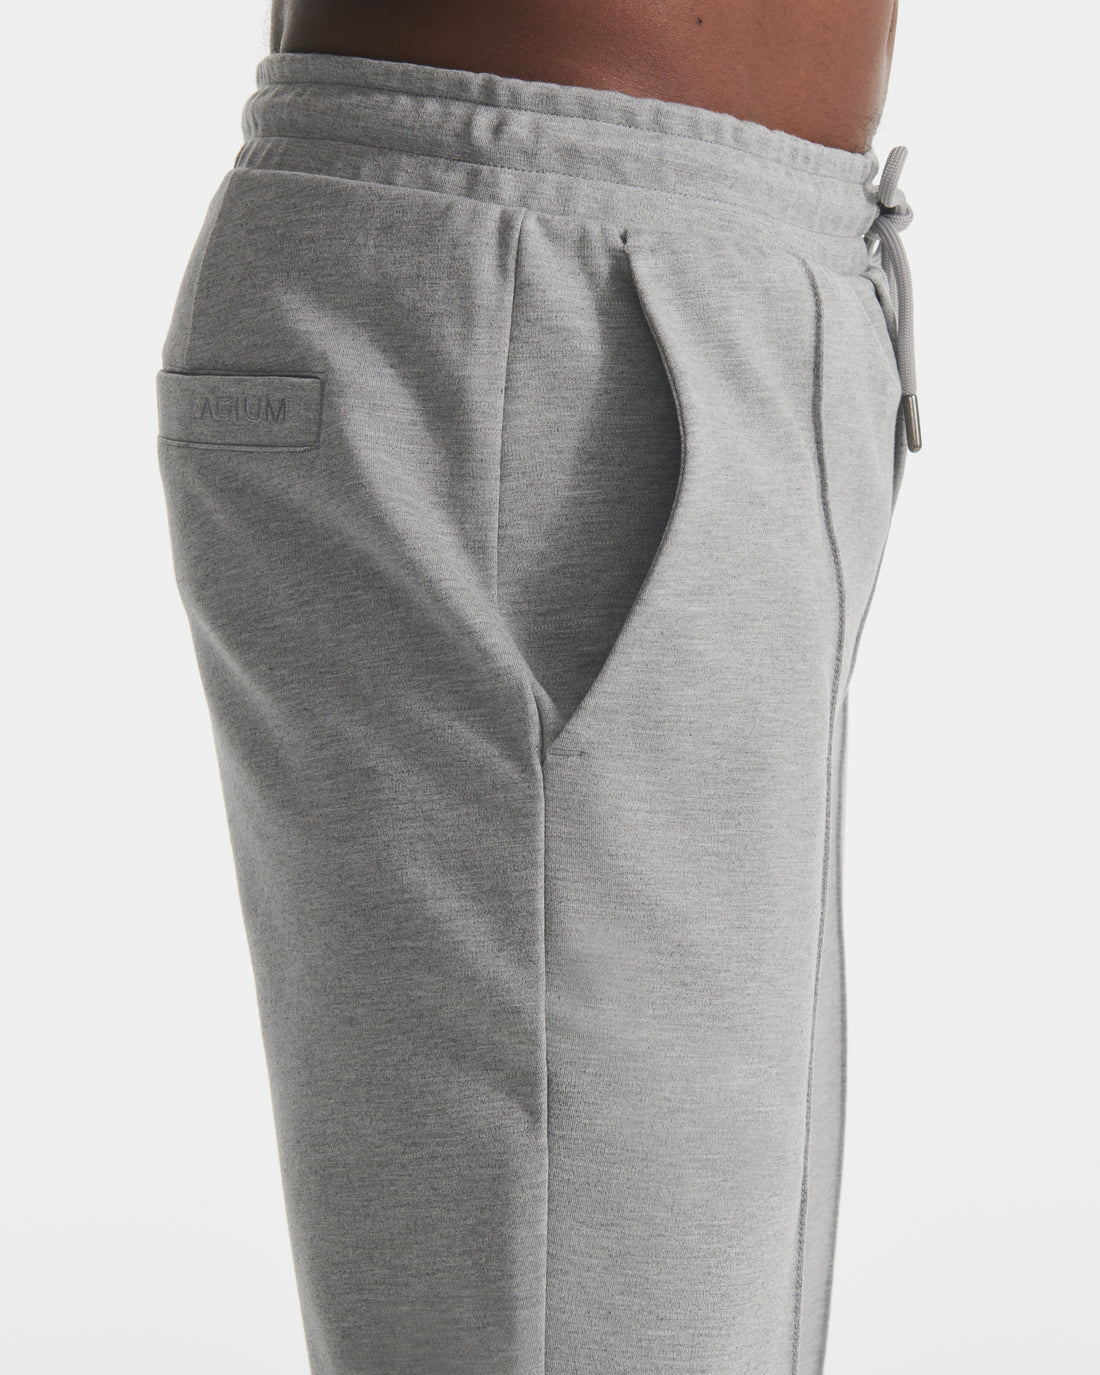 Heather Grey Dual Knit Pant | "The Future of Fitness" Men's Health